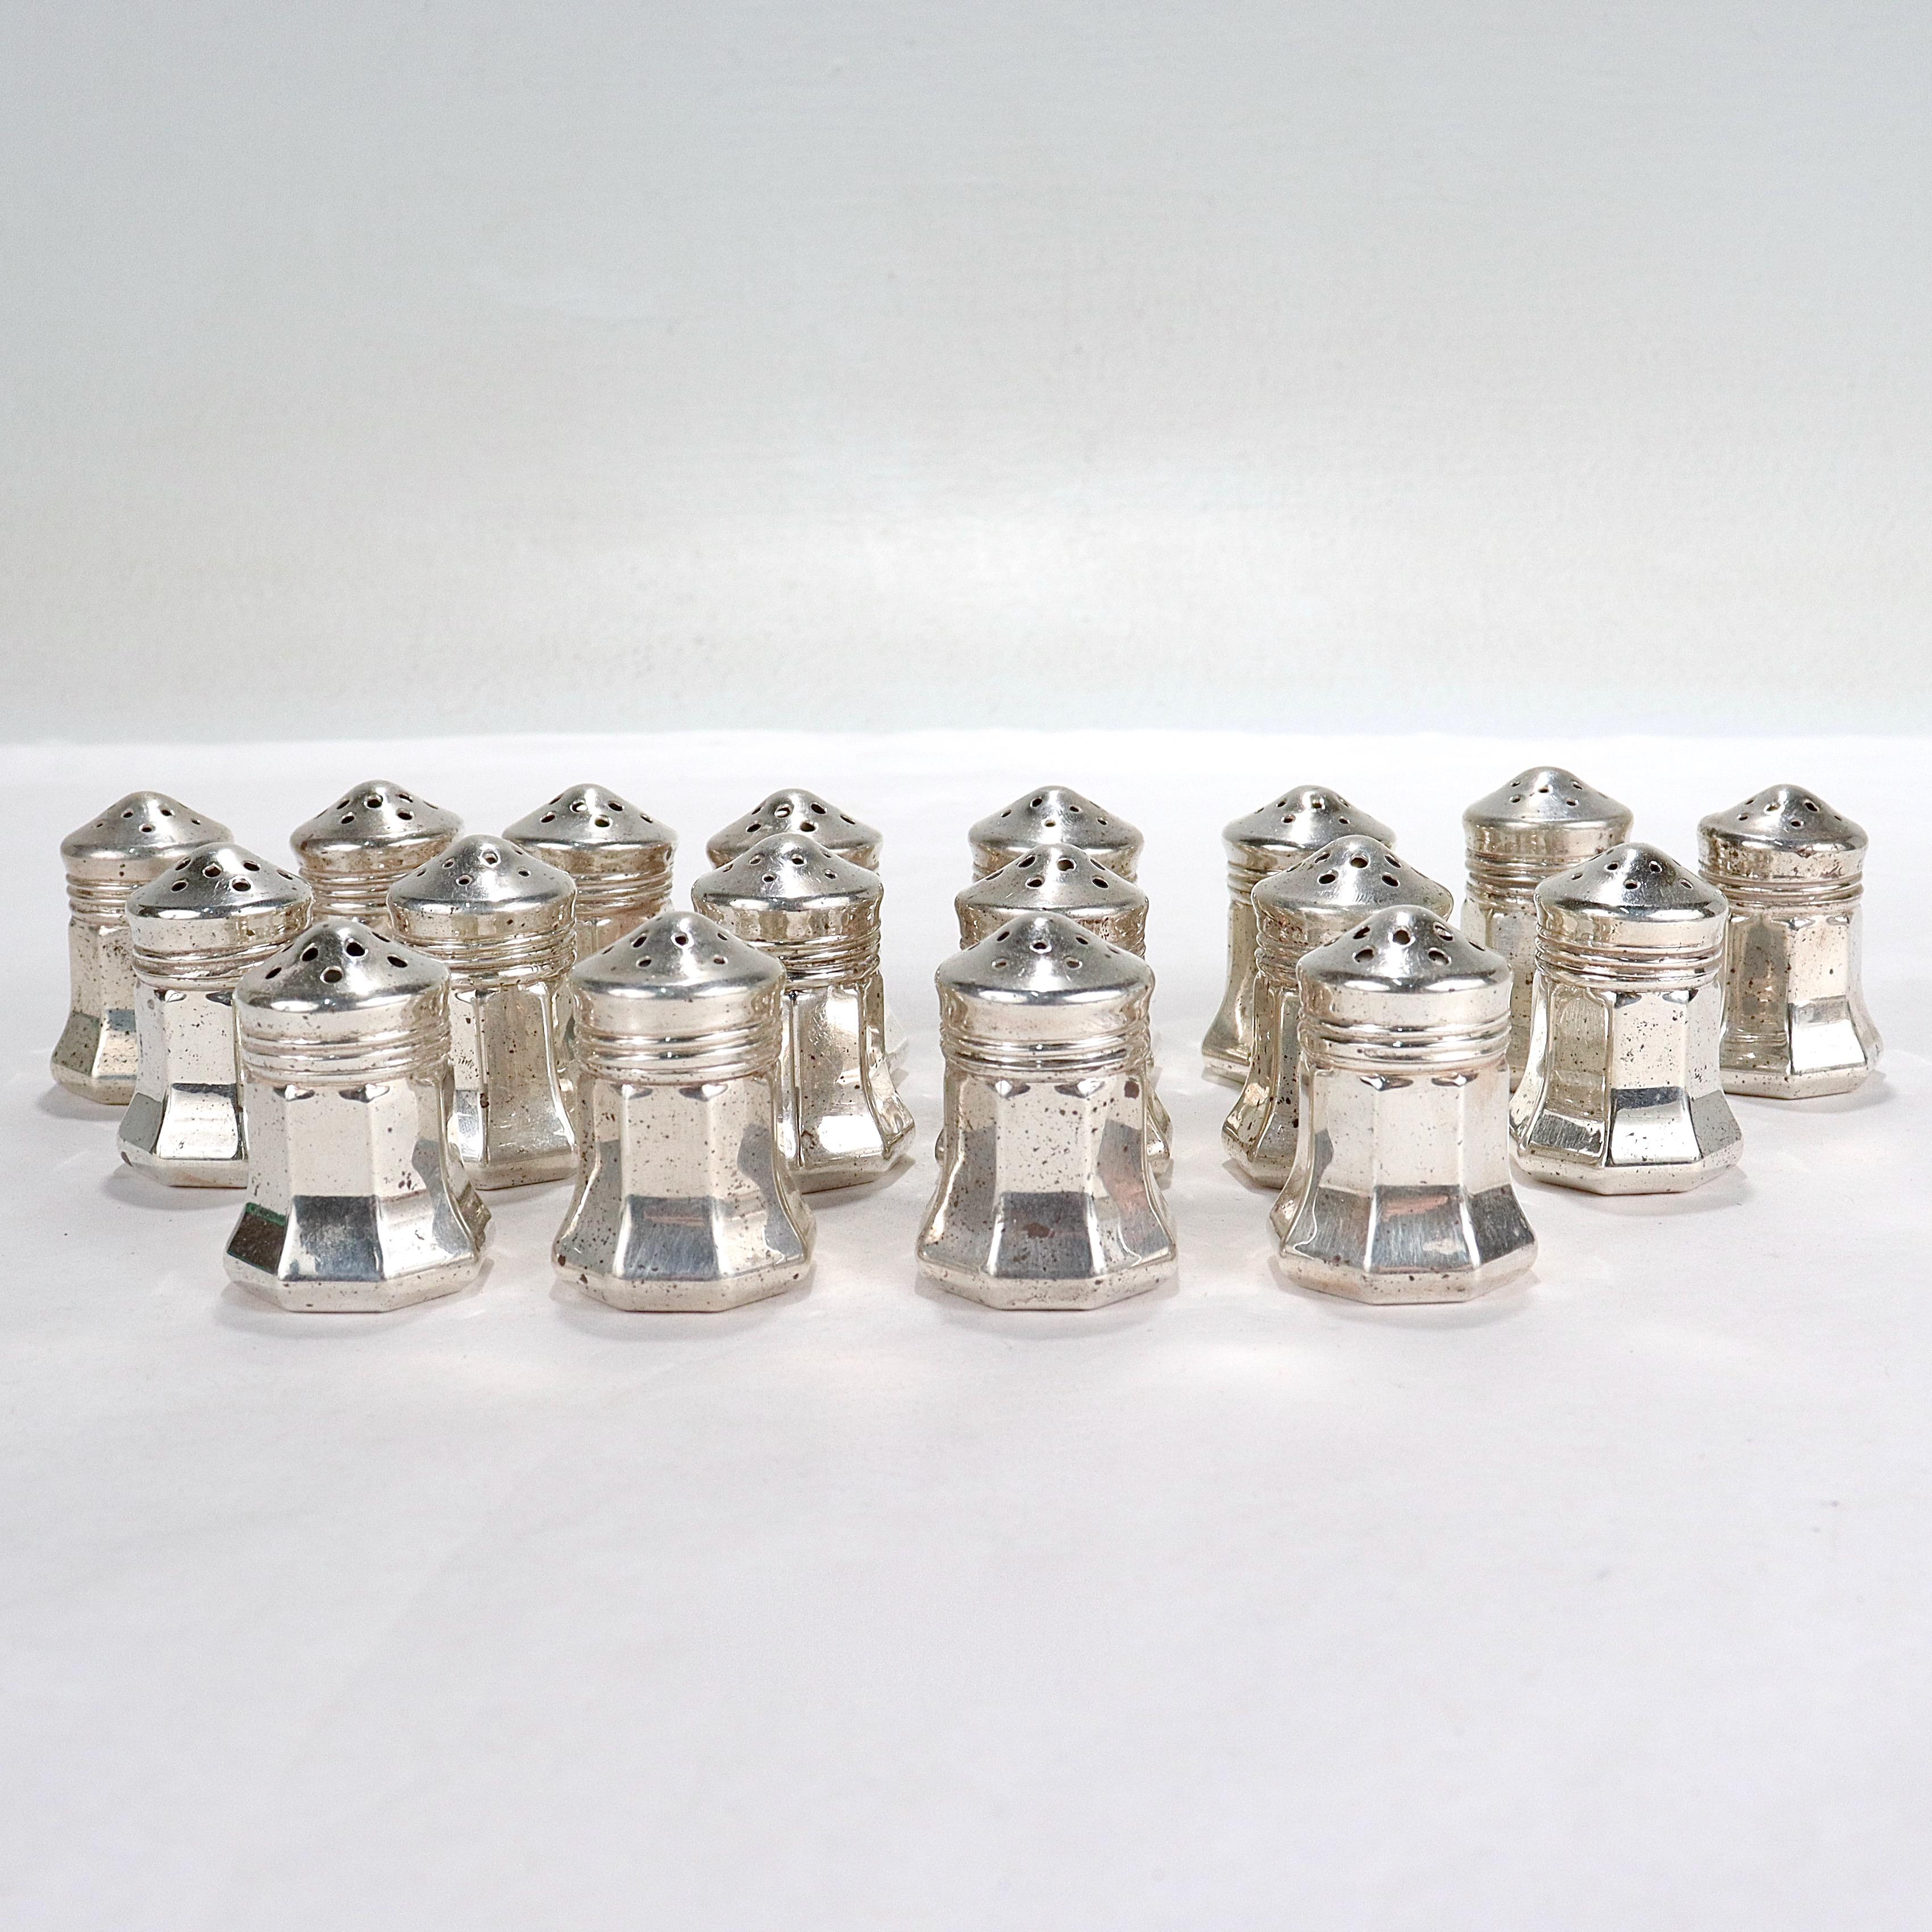 A fine set of 18 silver salt & pepper shakers.

By Cartier.

In sterling silver.

With each marked Cartier / Sterling to the base.

Overall Condition:
They are in overall fair, as-pictured, used estate condition.

Condition Details:
There are some